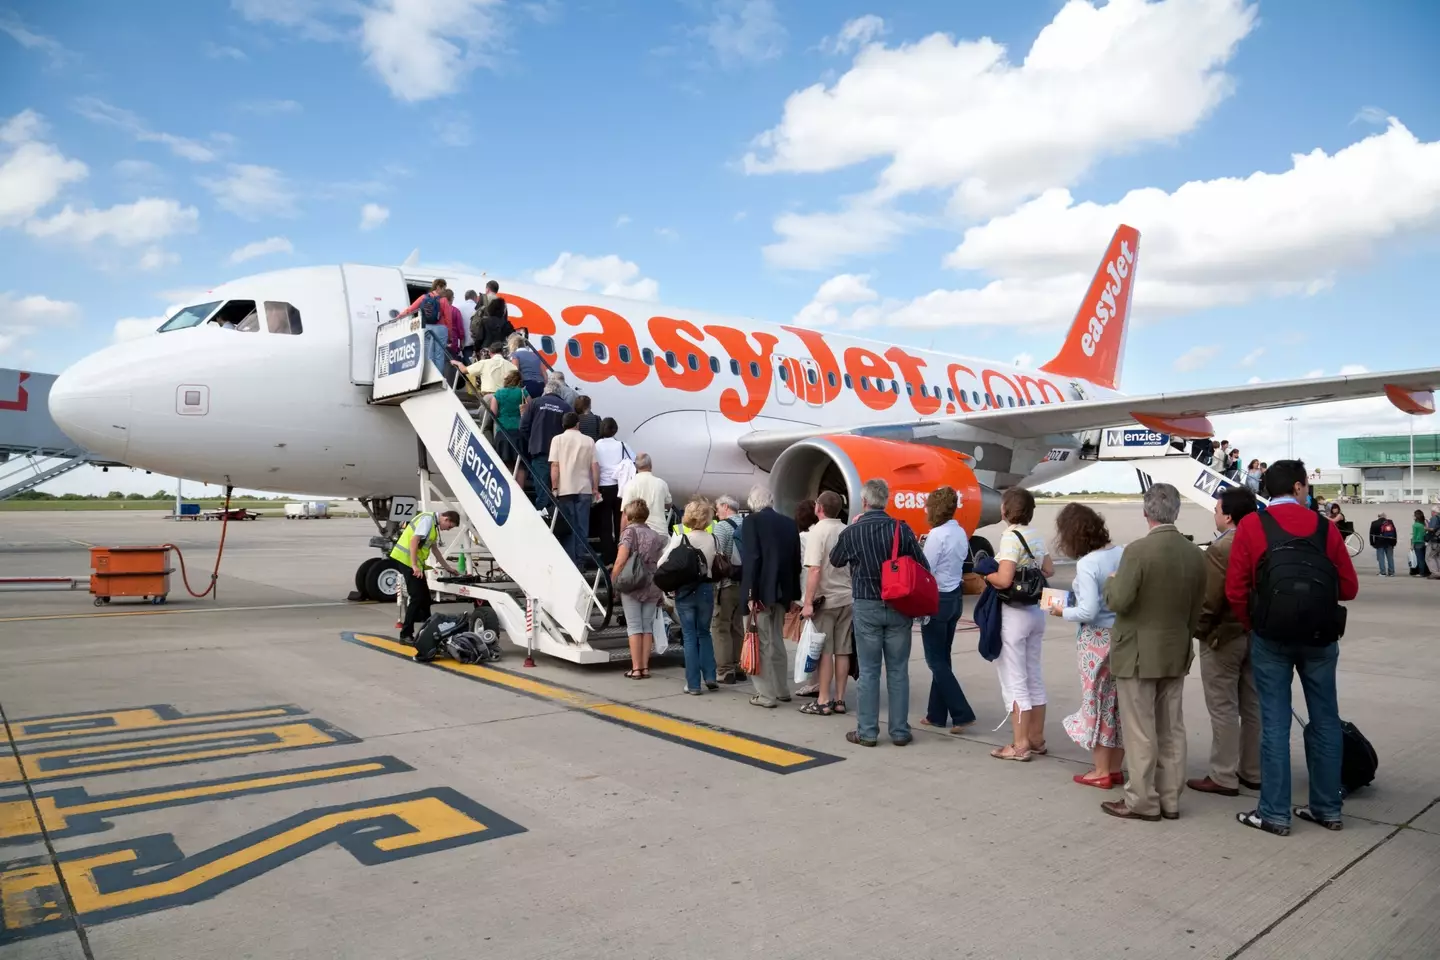 EasyJet is expected to cancel thousands of flights over the next few months.